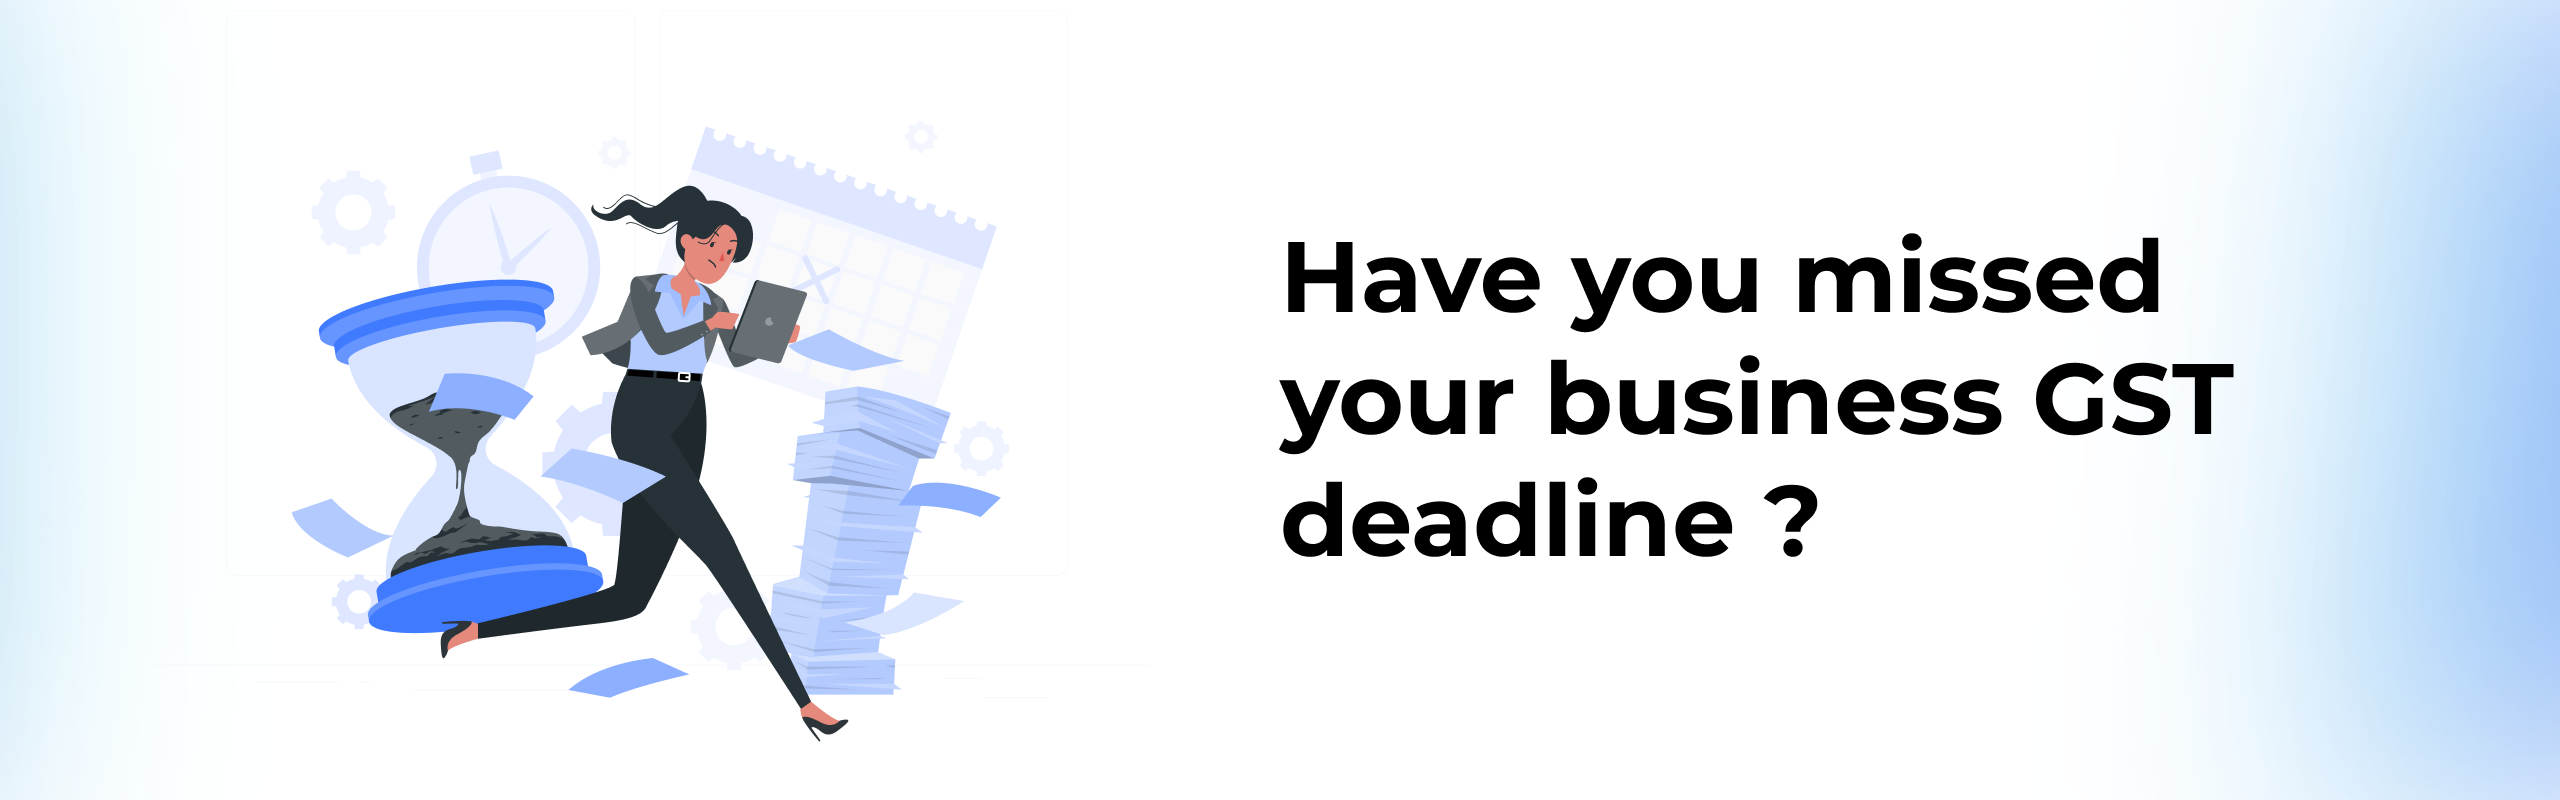 Have you missed your business GST deadline